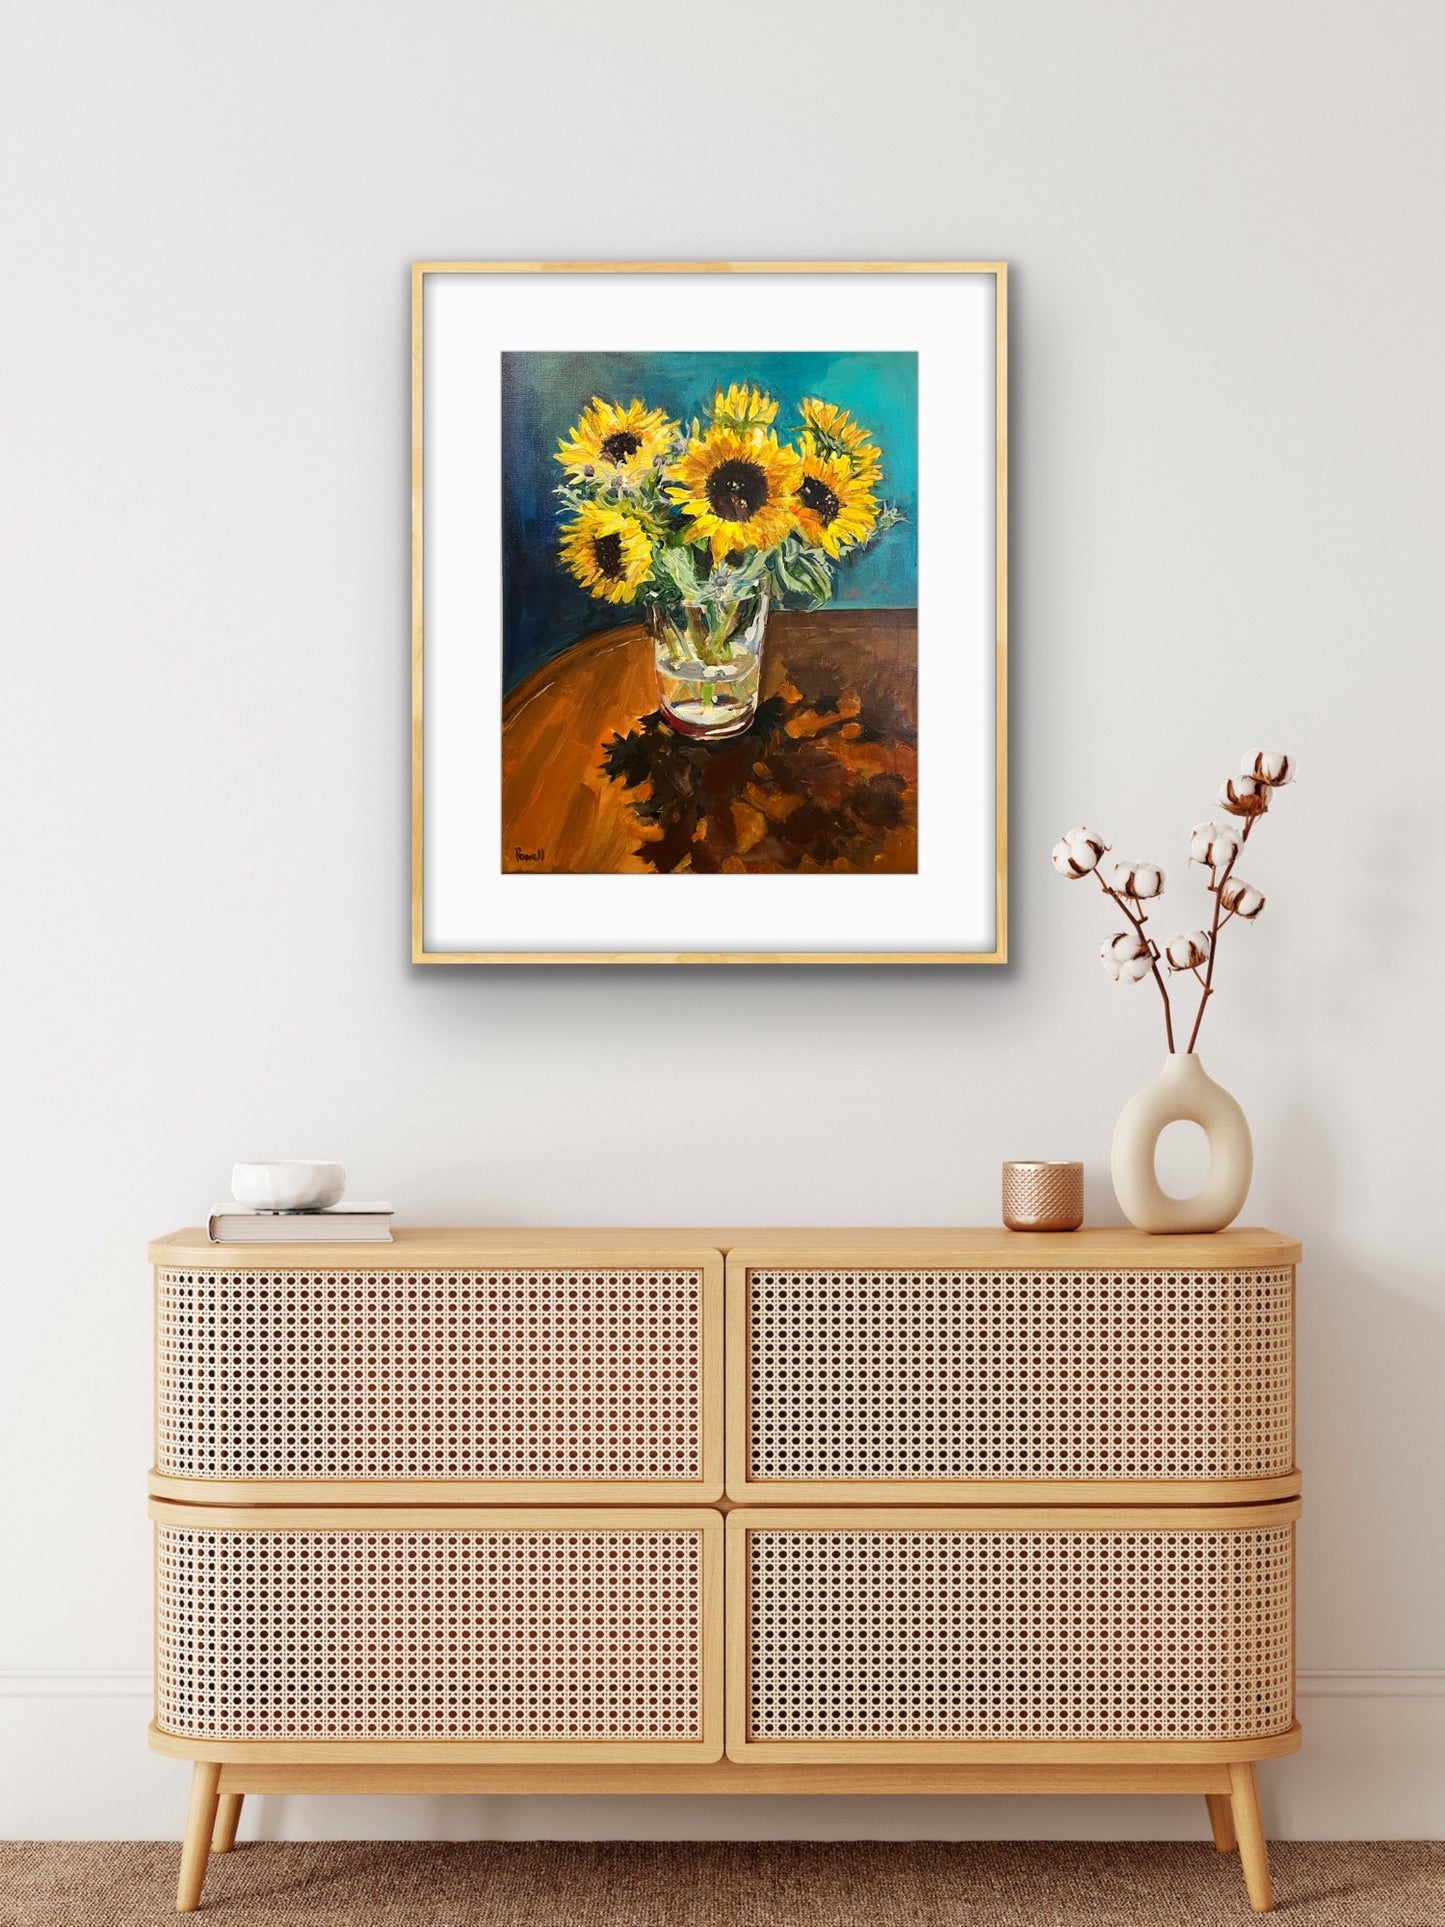 Sunflowers, Thistles and Shadows - Print